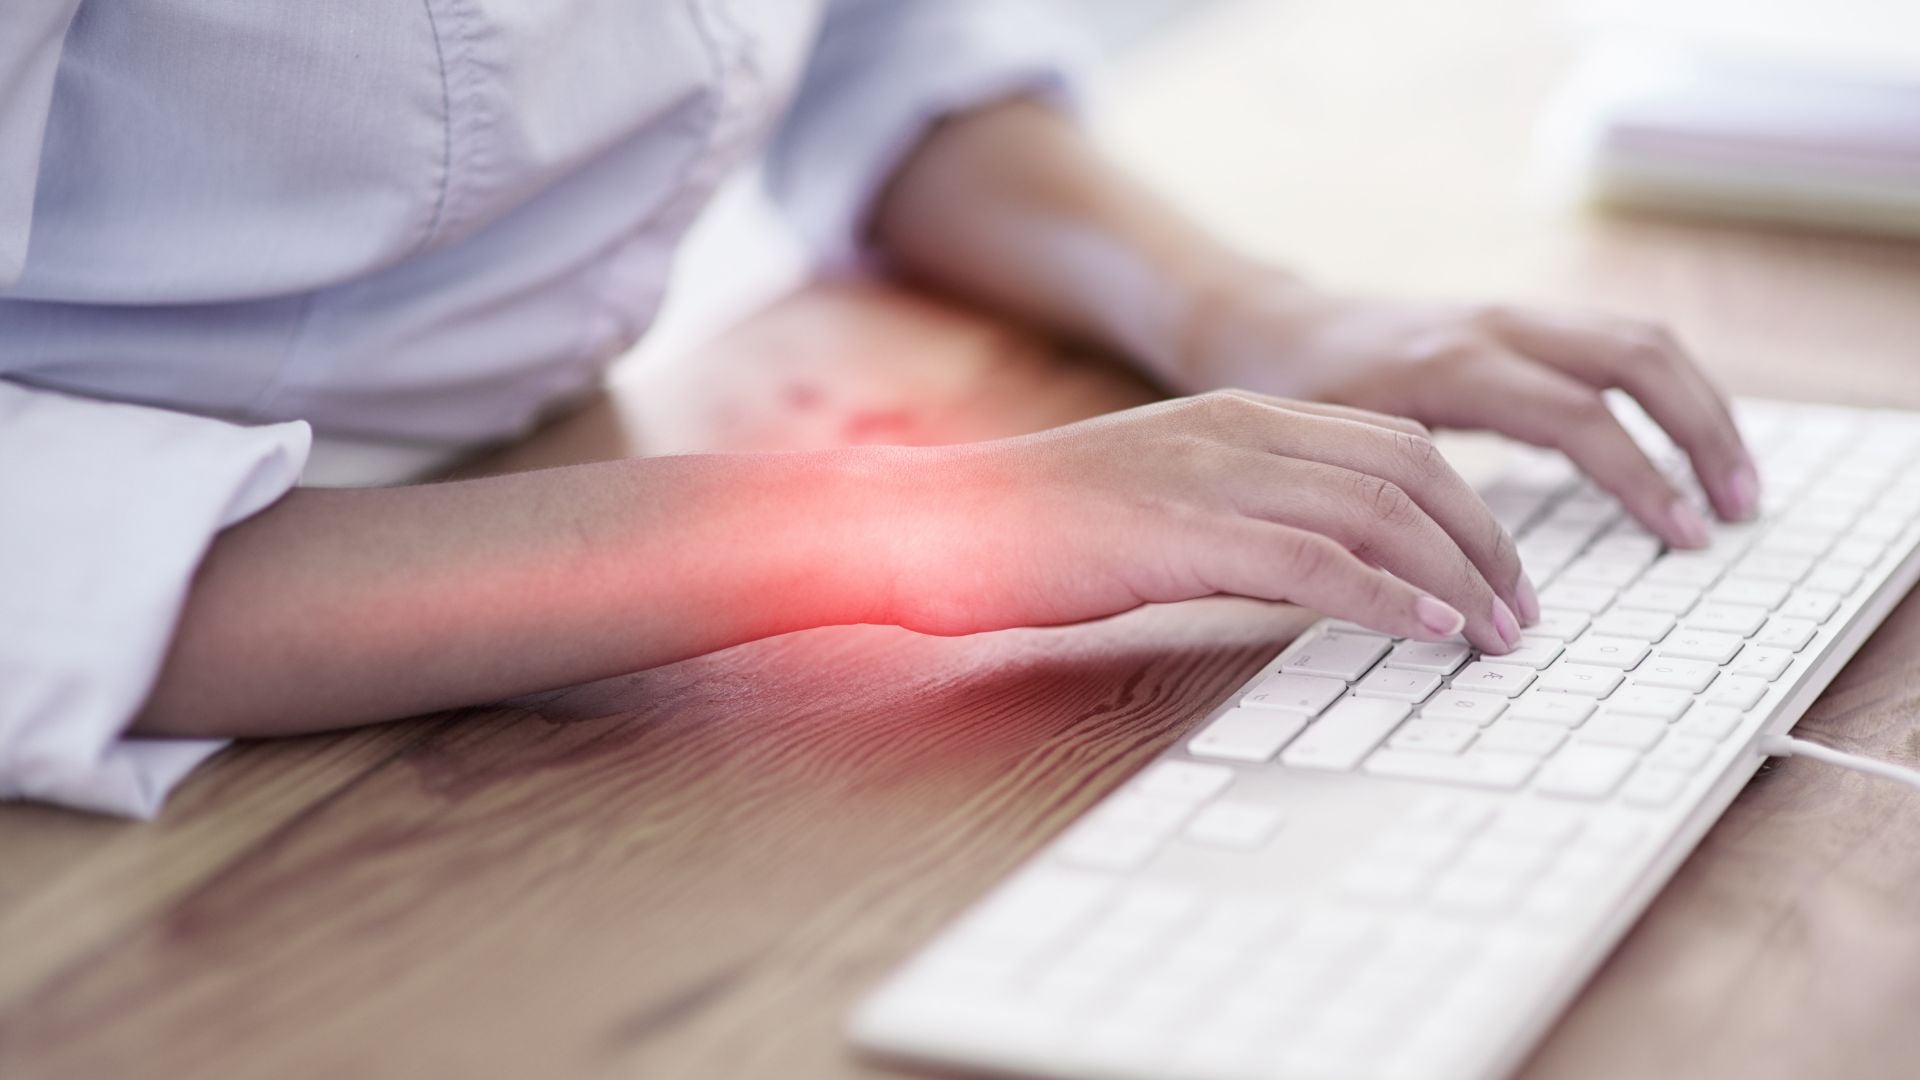 5 At-Home Remedies for Carpal Tunnel Pain - Dr. Frederick's Original